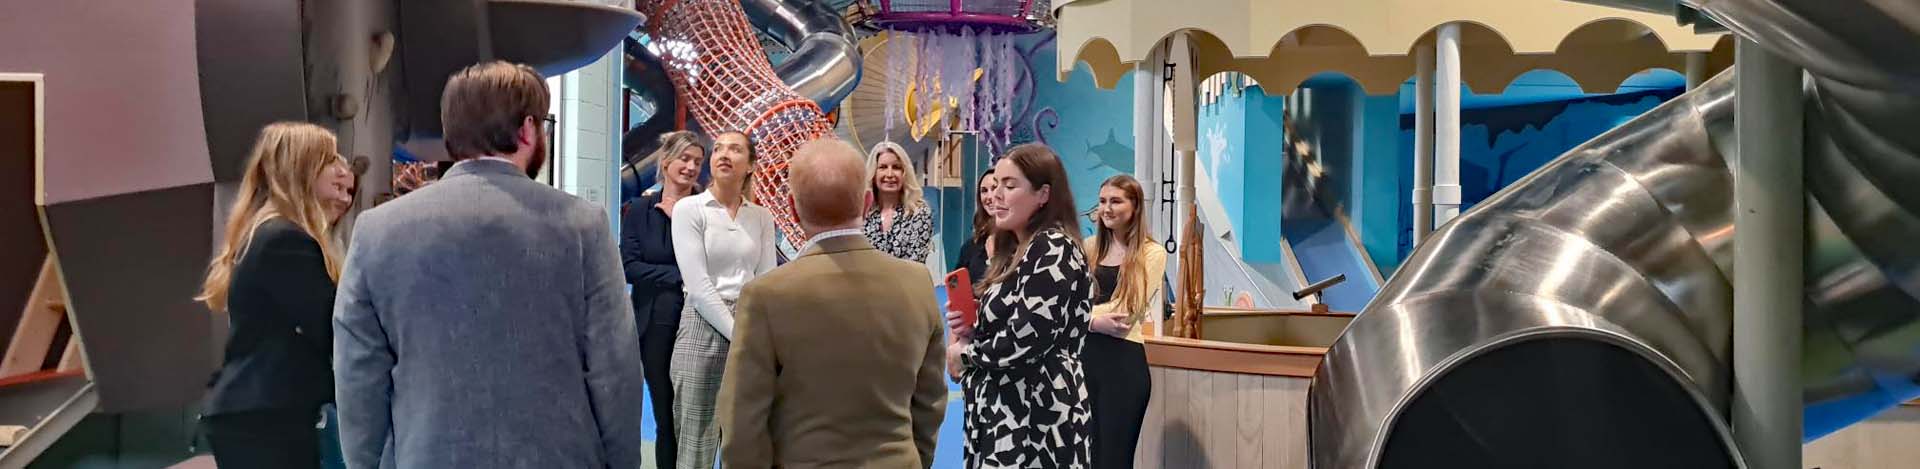 Attractions Forum meets at stunning new visitor experience